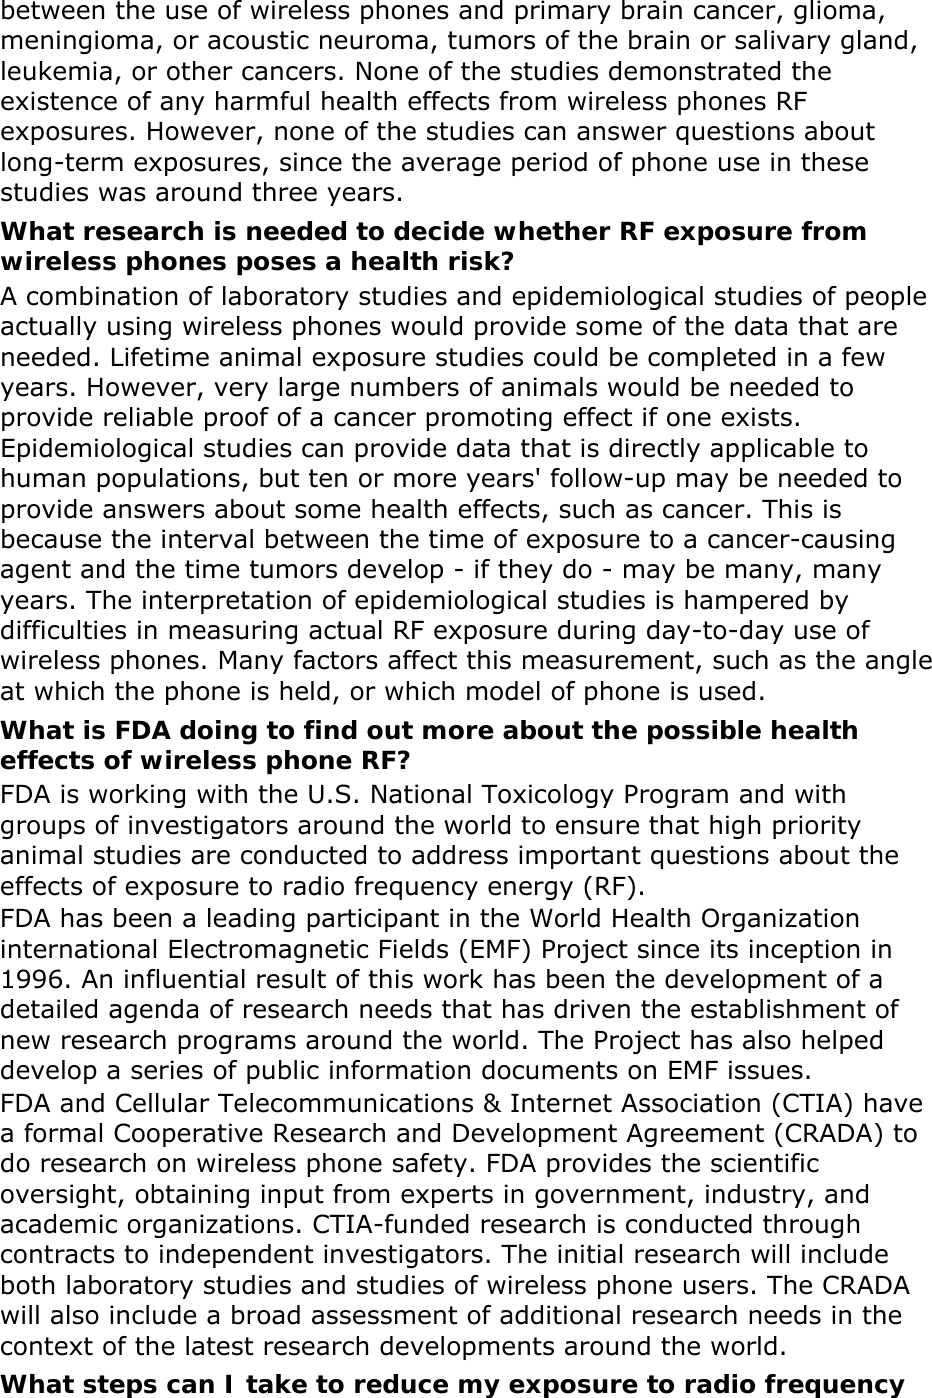 between the use of wireless phones and primary brain cancer, glioma, meningioma, or acoustic neuroma, tumors of the brain or salivary gland, leukemia, or other cancers. None of the studies demonstrated the existence of any harmful health effects from wireless phones RF exposures. However, none of the studies can answer questions about long-term exposures, since the average period of phone use in these studies was around three years. What research is needed to decide whether RF exposure from wireless phones poses a health risk? A combination of laboratory studies and epidemiological studies of people actually using wireless phones would provide some of the data that are needed. Lifetime animal exposure studies could be completed in a few years. However, very large numbers of animals would be needed to provide reliable proof of a cancer promoting effect if one exists. Epidemiological studies can provide data that is directly applicable to human populations, but ten or more years&apos; follow-up may be needed to provide answers about some health effects, such as cancer. This is because the interval between the time of exposure to a cancer-causing agent and the time tumors develop - if they do - may be many, many years. The interpretation of epidemiological studies is hampered by difficulties in measuring actual RF exposure during day-to-day use of wireless phones. Many factors affect this measurement, such as the angle at which the phone is held, or which model of phone is used. What is FDA doing to find out more about the possible health effects of wireless phone RF? FDA is working with the U.S. National Toxicology Program and with groups of investigators around the world to ensure that high priority animal studies are conducted to address important questions about the effects of exposure to radio frequency energy (RF). FDA has been a leading participant in the World Health Organization international Electromagnetic Fields (EMF) Project since its inception in 1996. An influential result of this work has been the development of a detailed agenda of research needs that has driven the establishment of new research programs around the world. The Project has also helped develop a series of public information documents on EMF issues. FDA and Cellular Telecommunications &amp; Internet Association (CTIA) have a formal Cooperative Research and Development Agreement (CRADA) to do research on wireless phone safety. FDA provides the scientific oversight, obtaining input from experts in government, industry, and academic organizations. CTIA-funded research is conducted through contracts to independent investigators. The initial research will include both laboratory studies and studies of wireless phone users. The CRADA will also include a broad assessment of additional research needs in the context of the latest research developments around the world. What steps can I take to reduce my exposure to radio frequency 